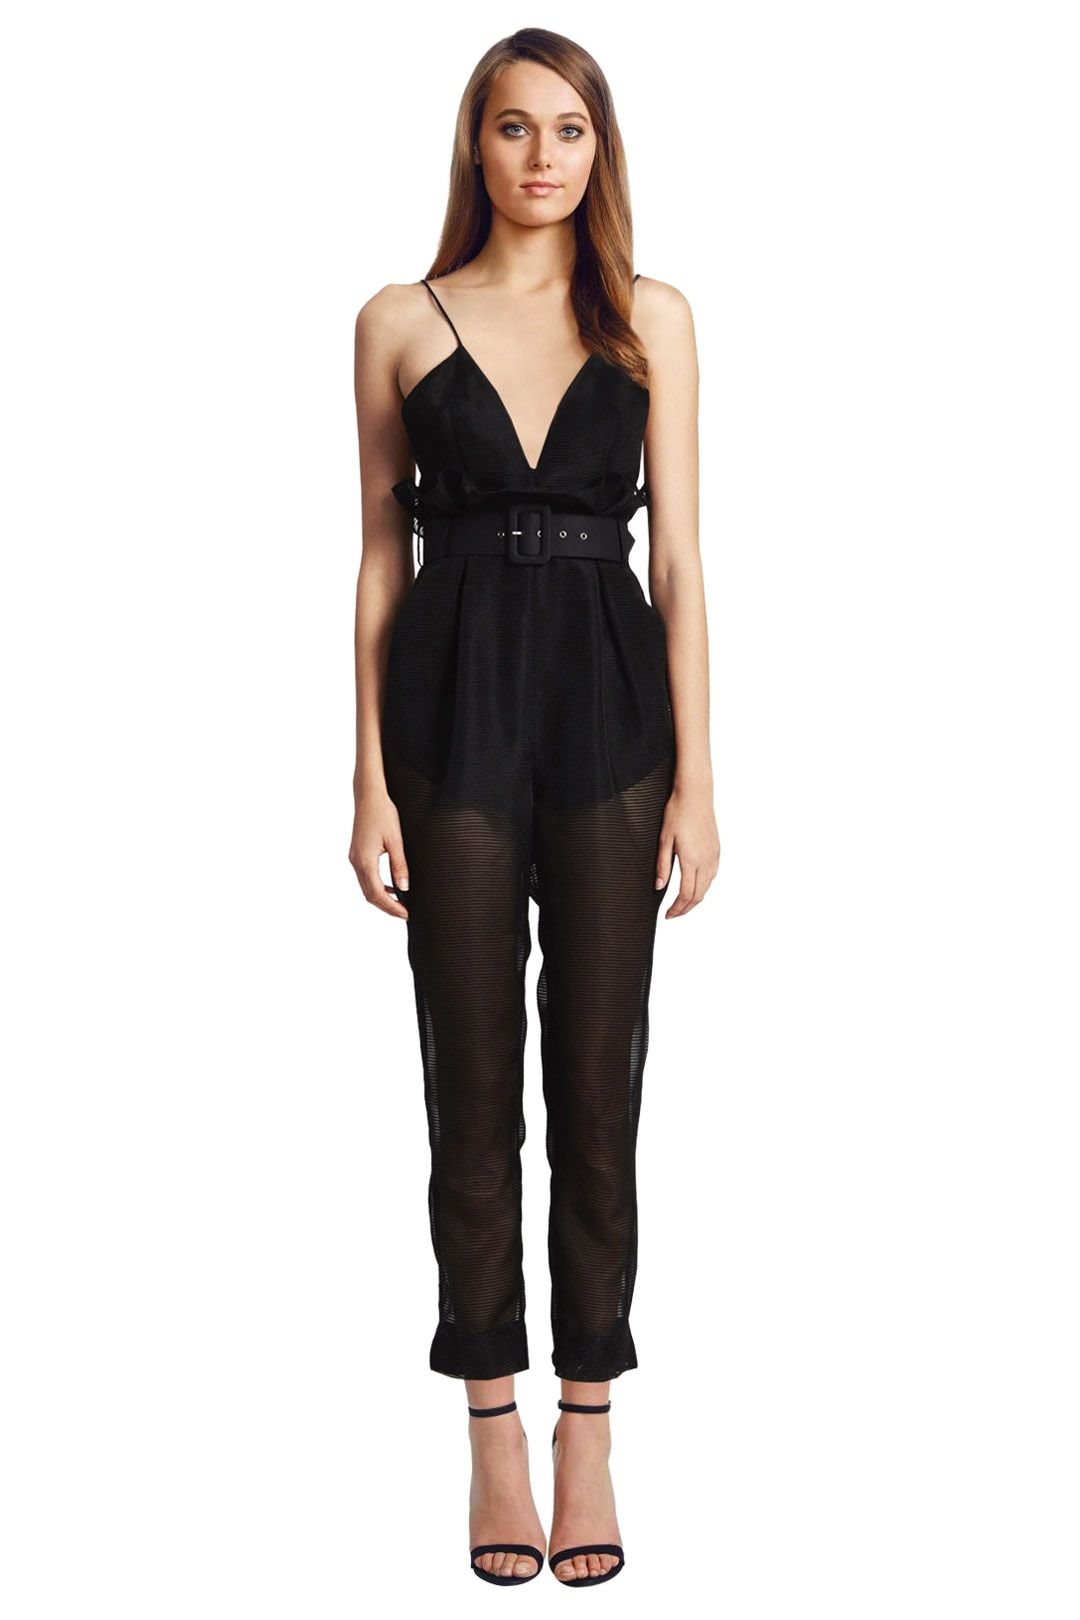 Justify My Love Jumpsuit by Alice McCall for Hire | GlamCorner